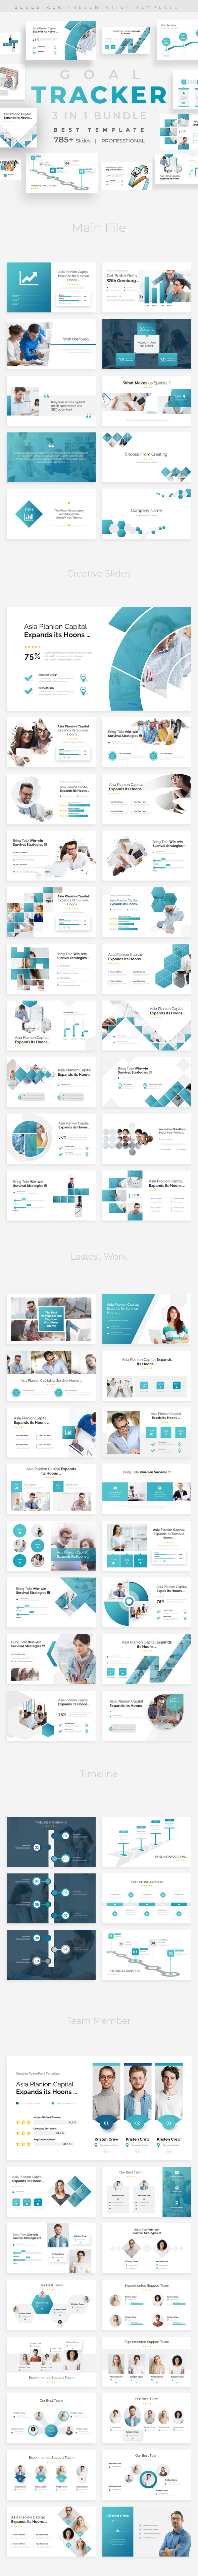 Goals Tracker 3 in 1 Pitch Deck Bundle Powerpoint Template Template